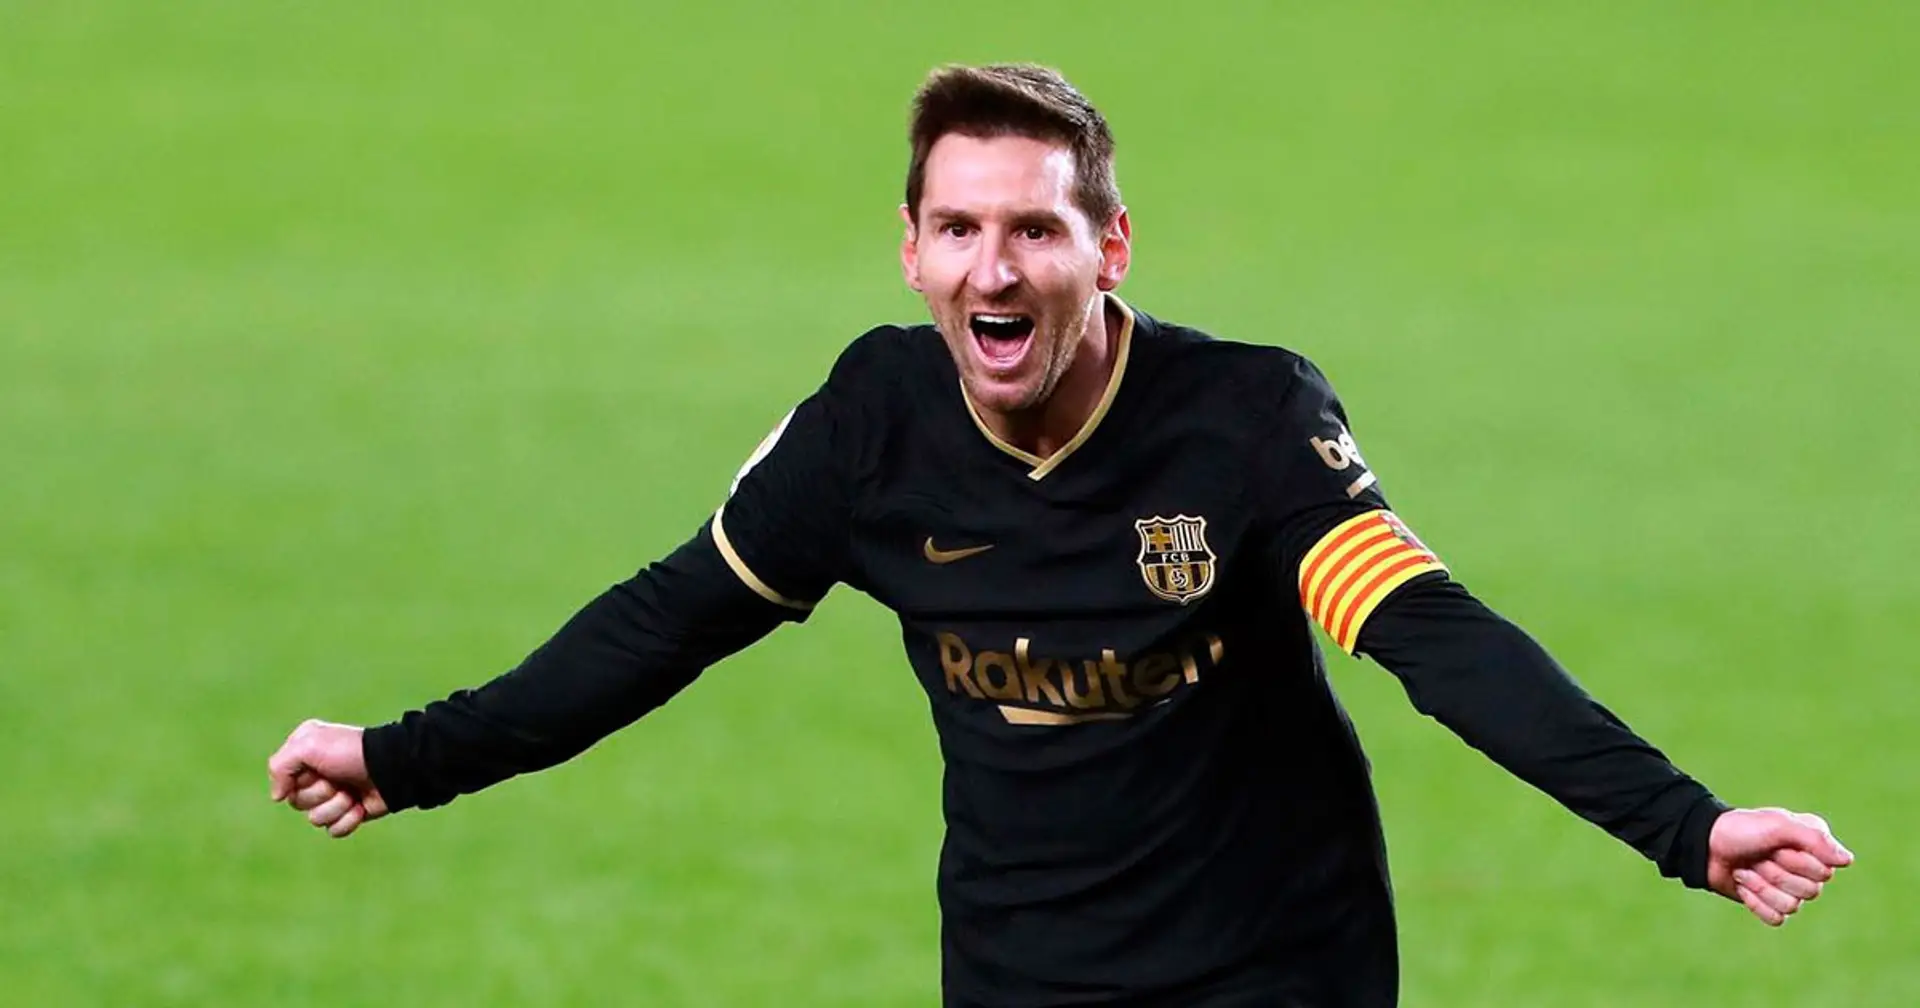 Leo Messi nominated for February Player of the Month award in La Liga